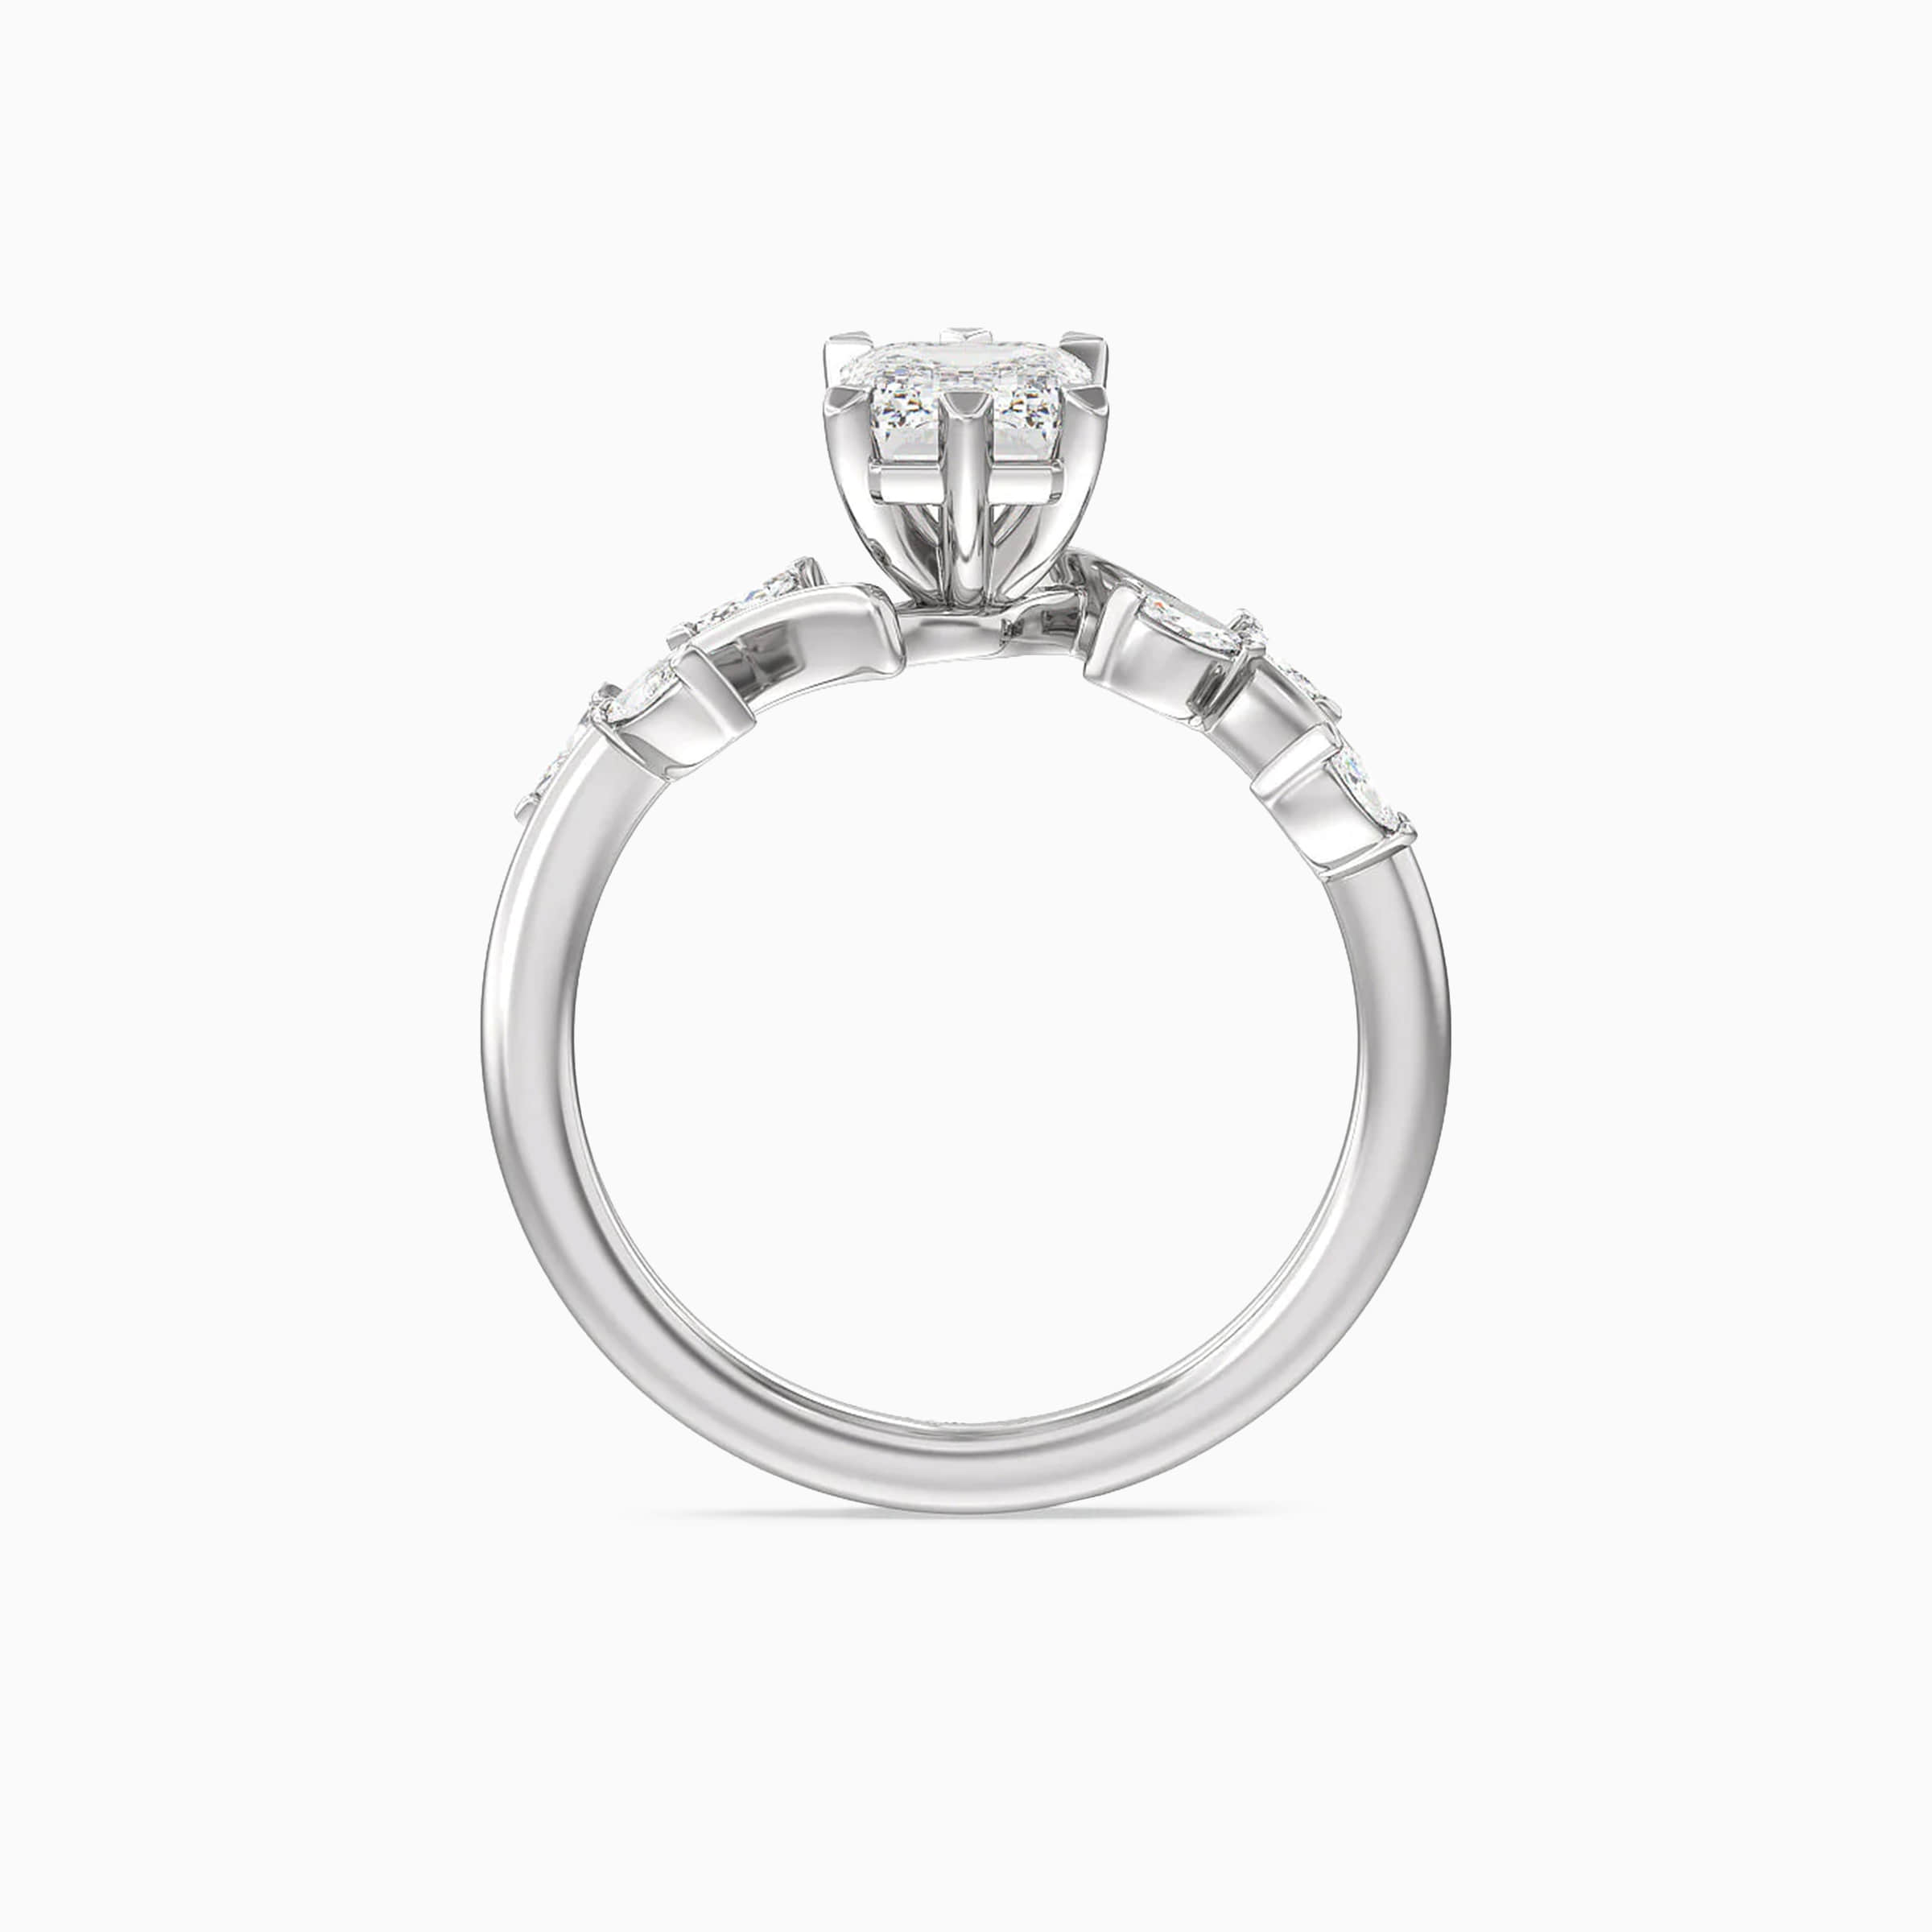 Darry Ring emerald cut vine engagement ring front view